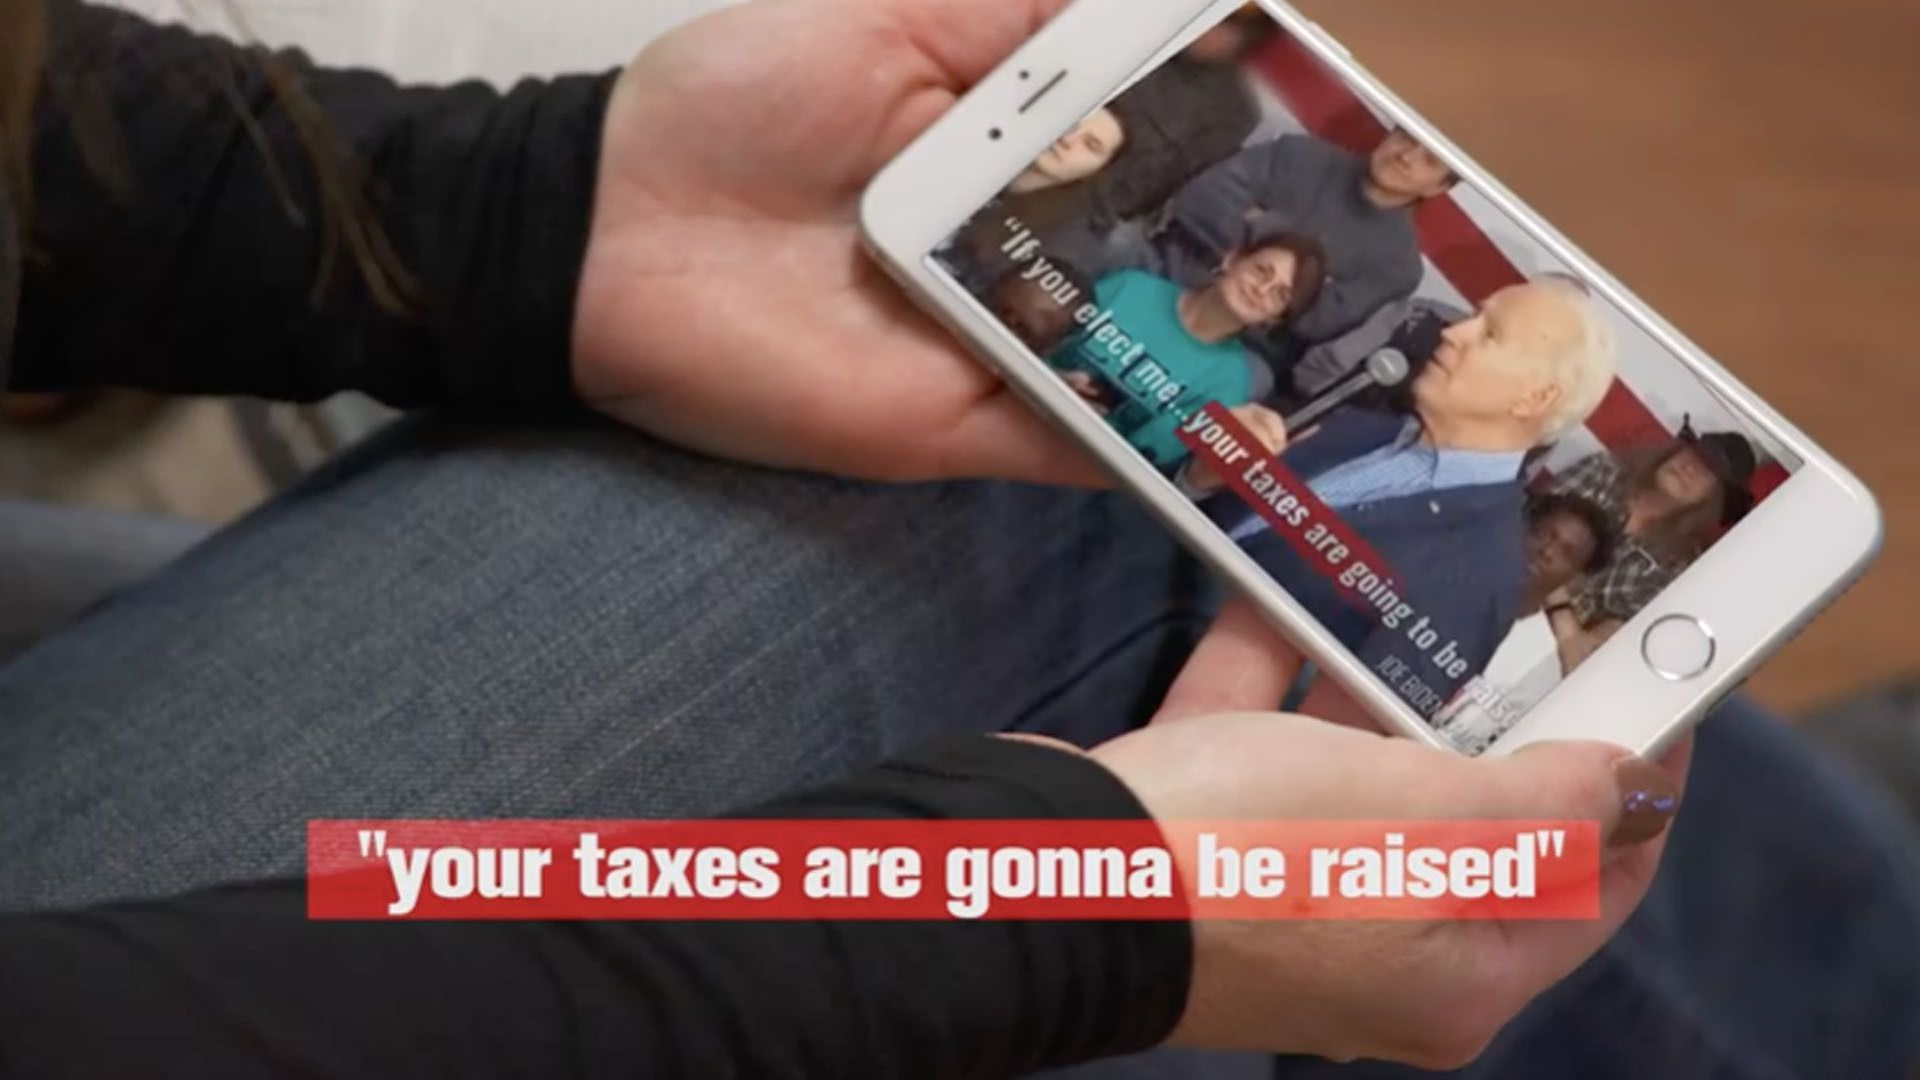 Screengrab of an ad showing Joe Biden saying "your taxes are gonna be raised"